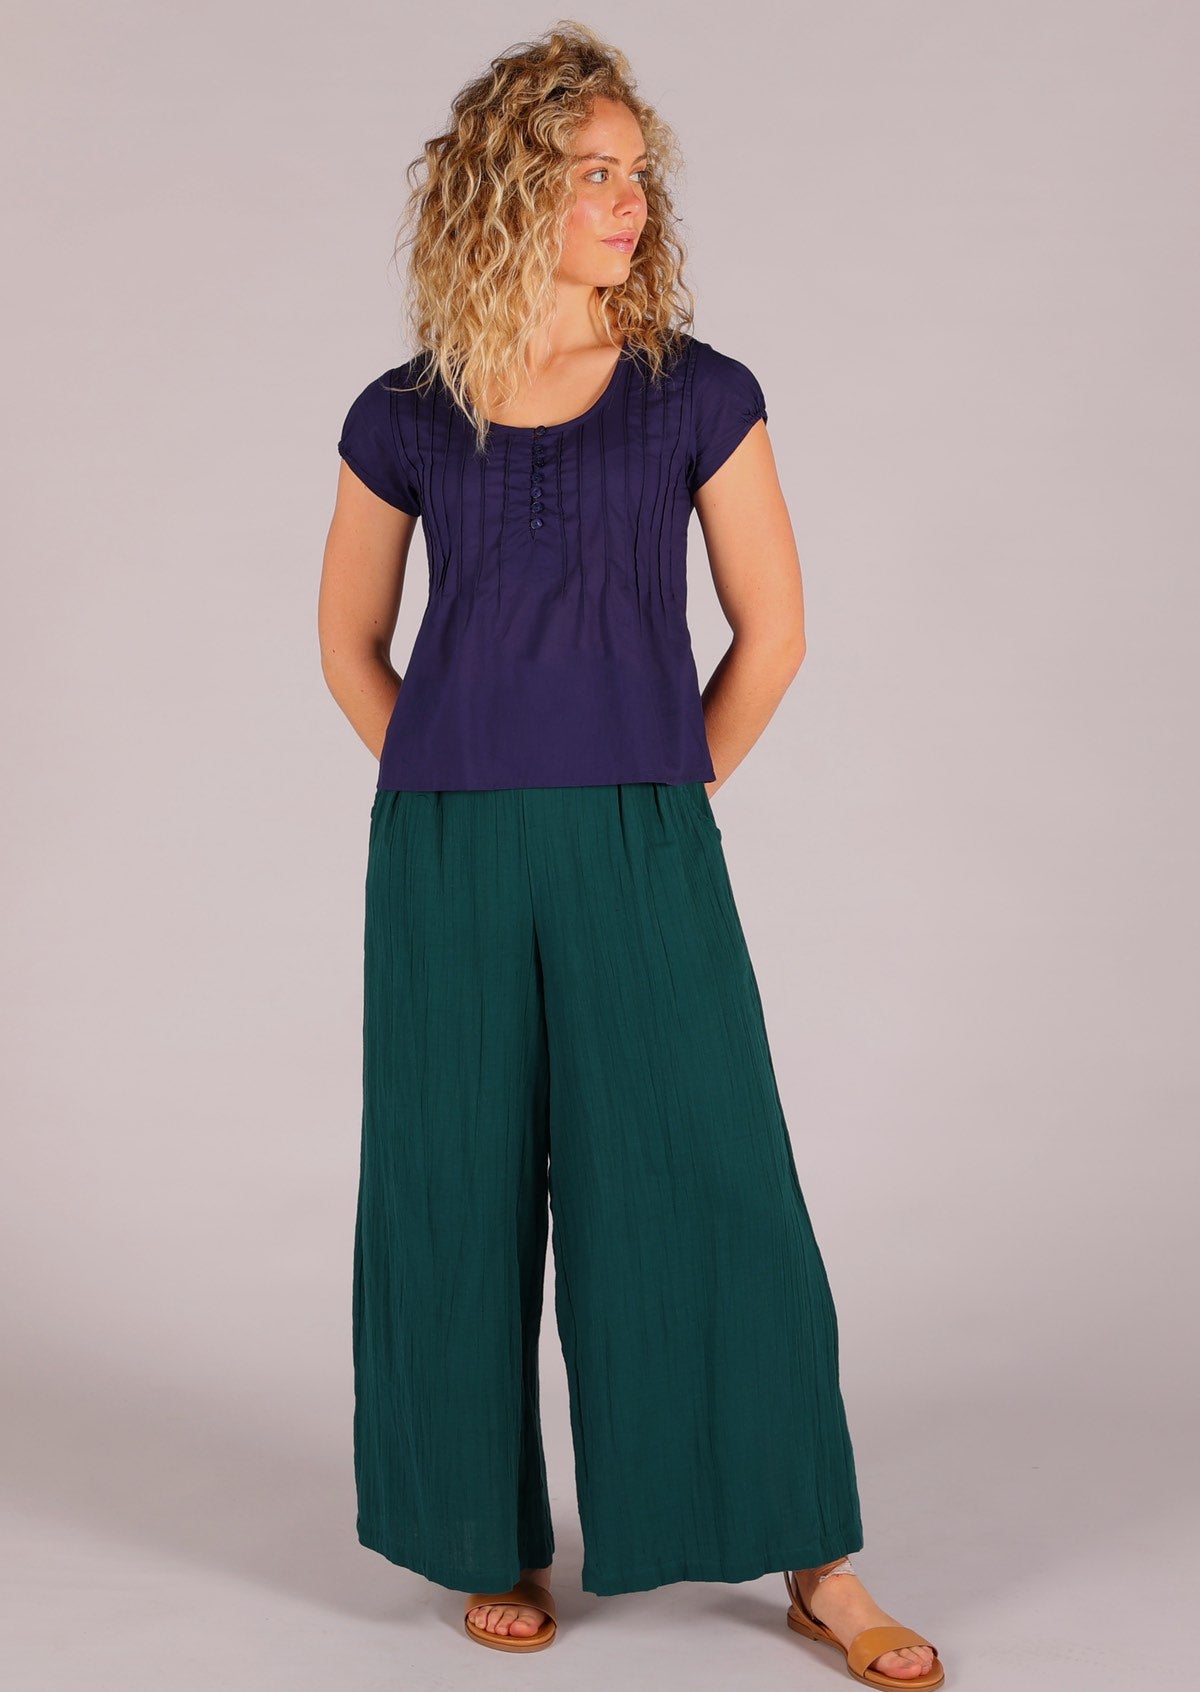 Wide leg pants provide ultimate comfort for any occasion